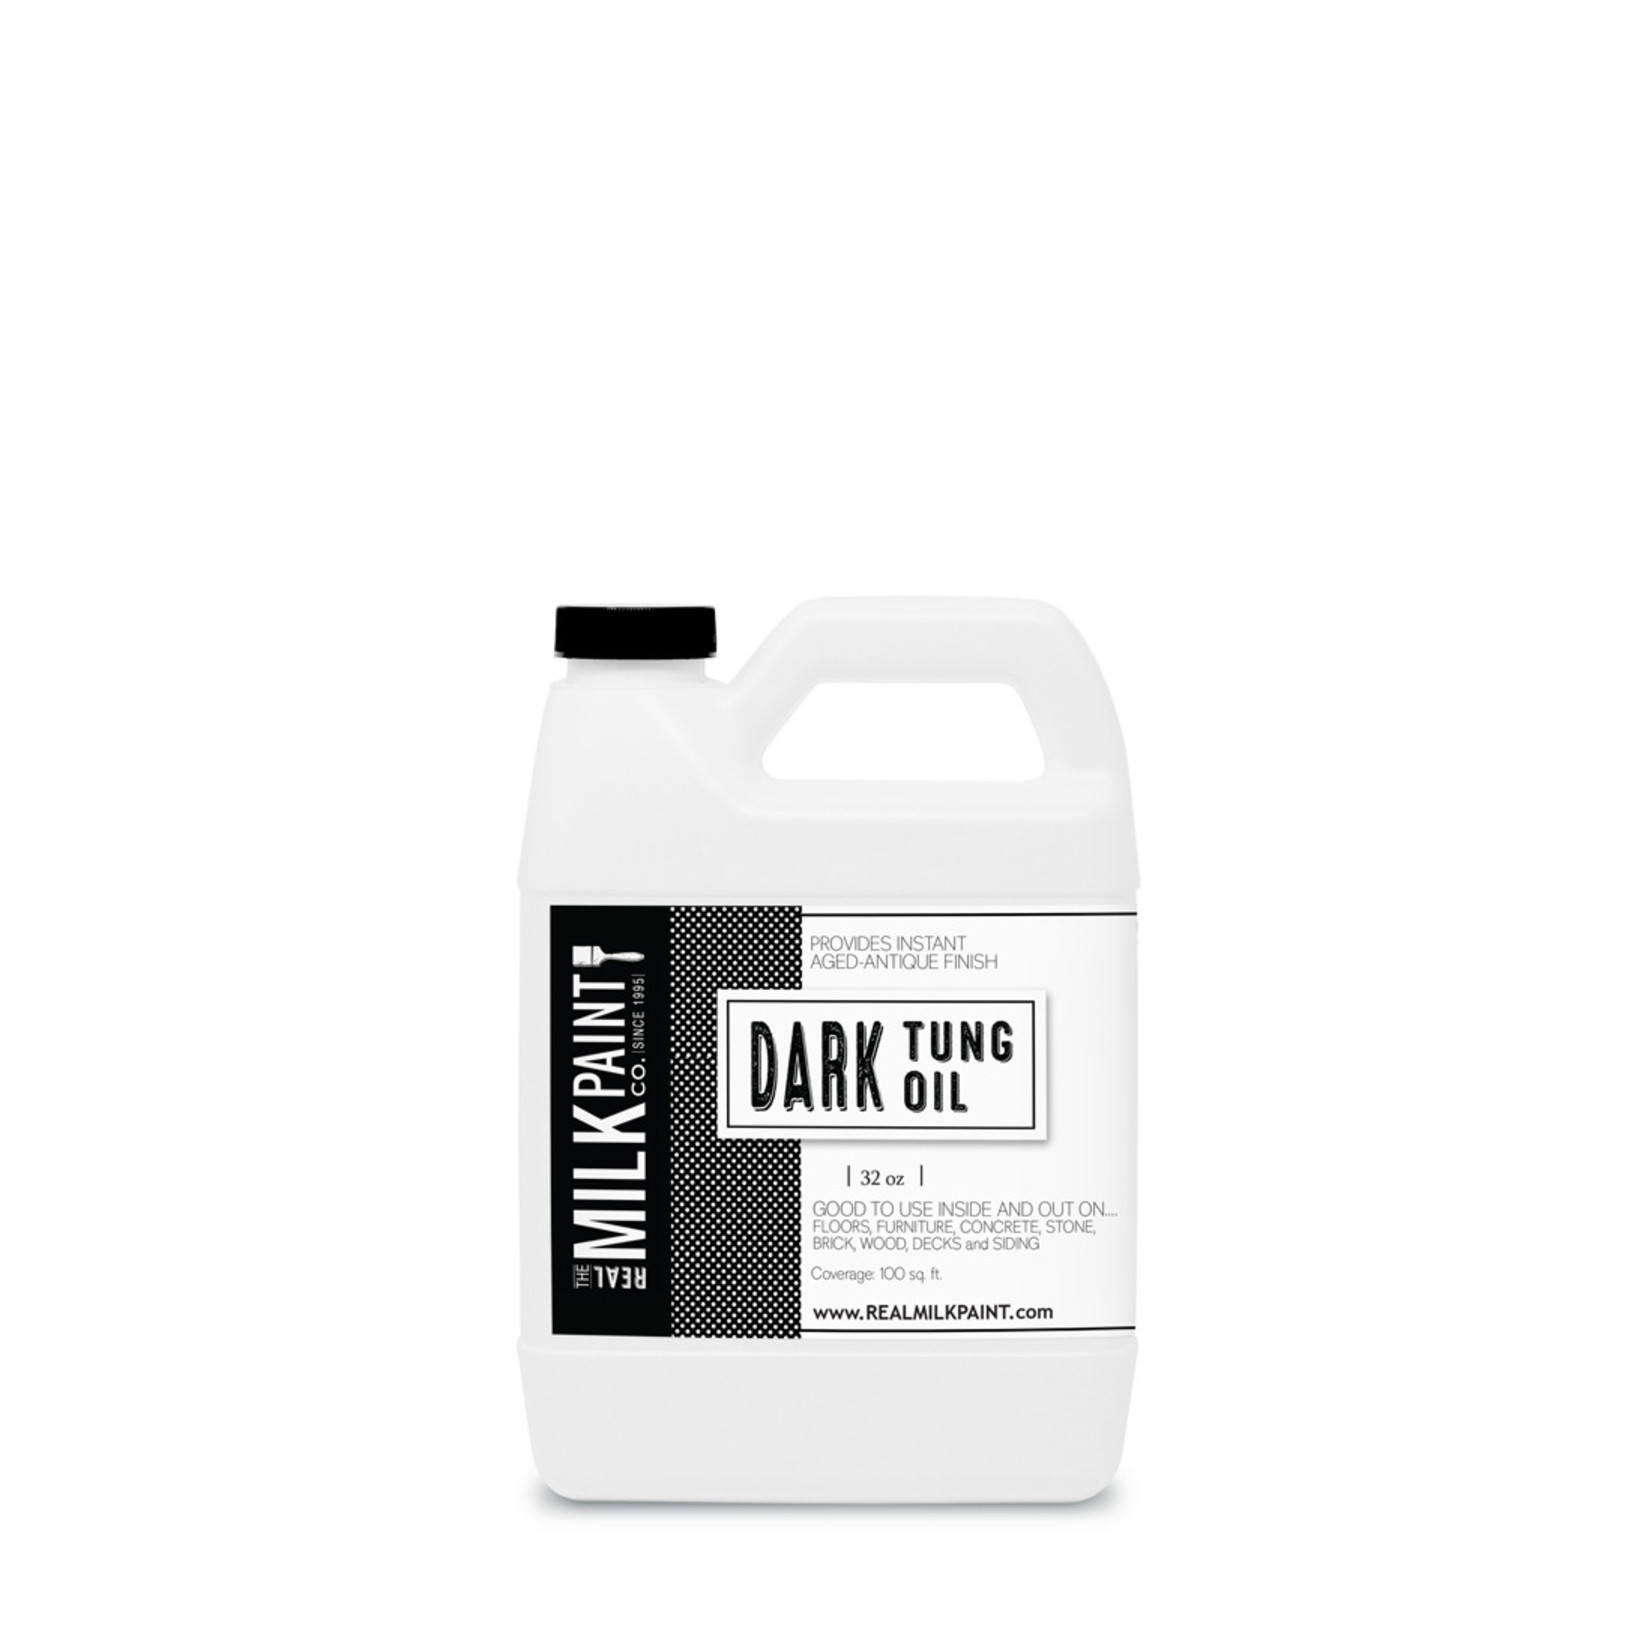 The Real Milk Paint Co. Real Milk Paint Dark Raw Tung Oil